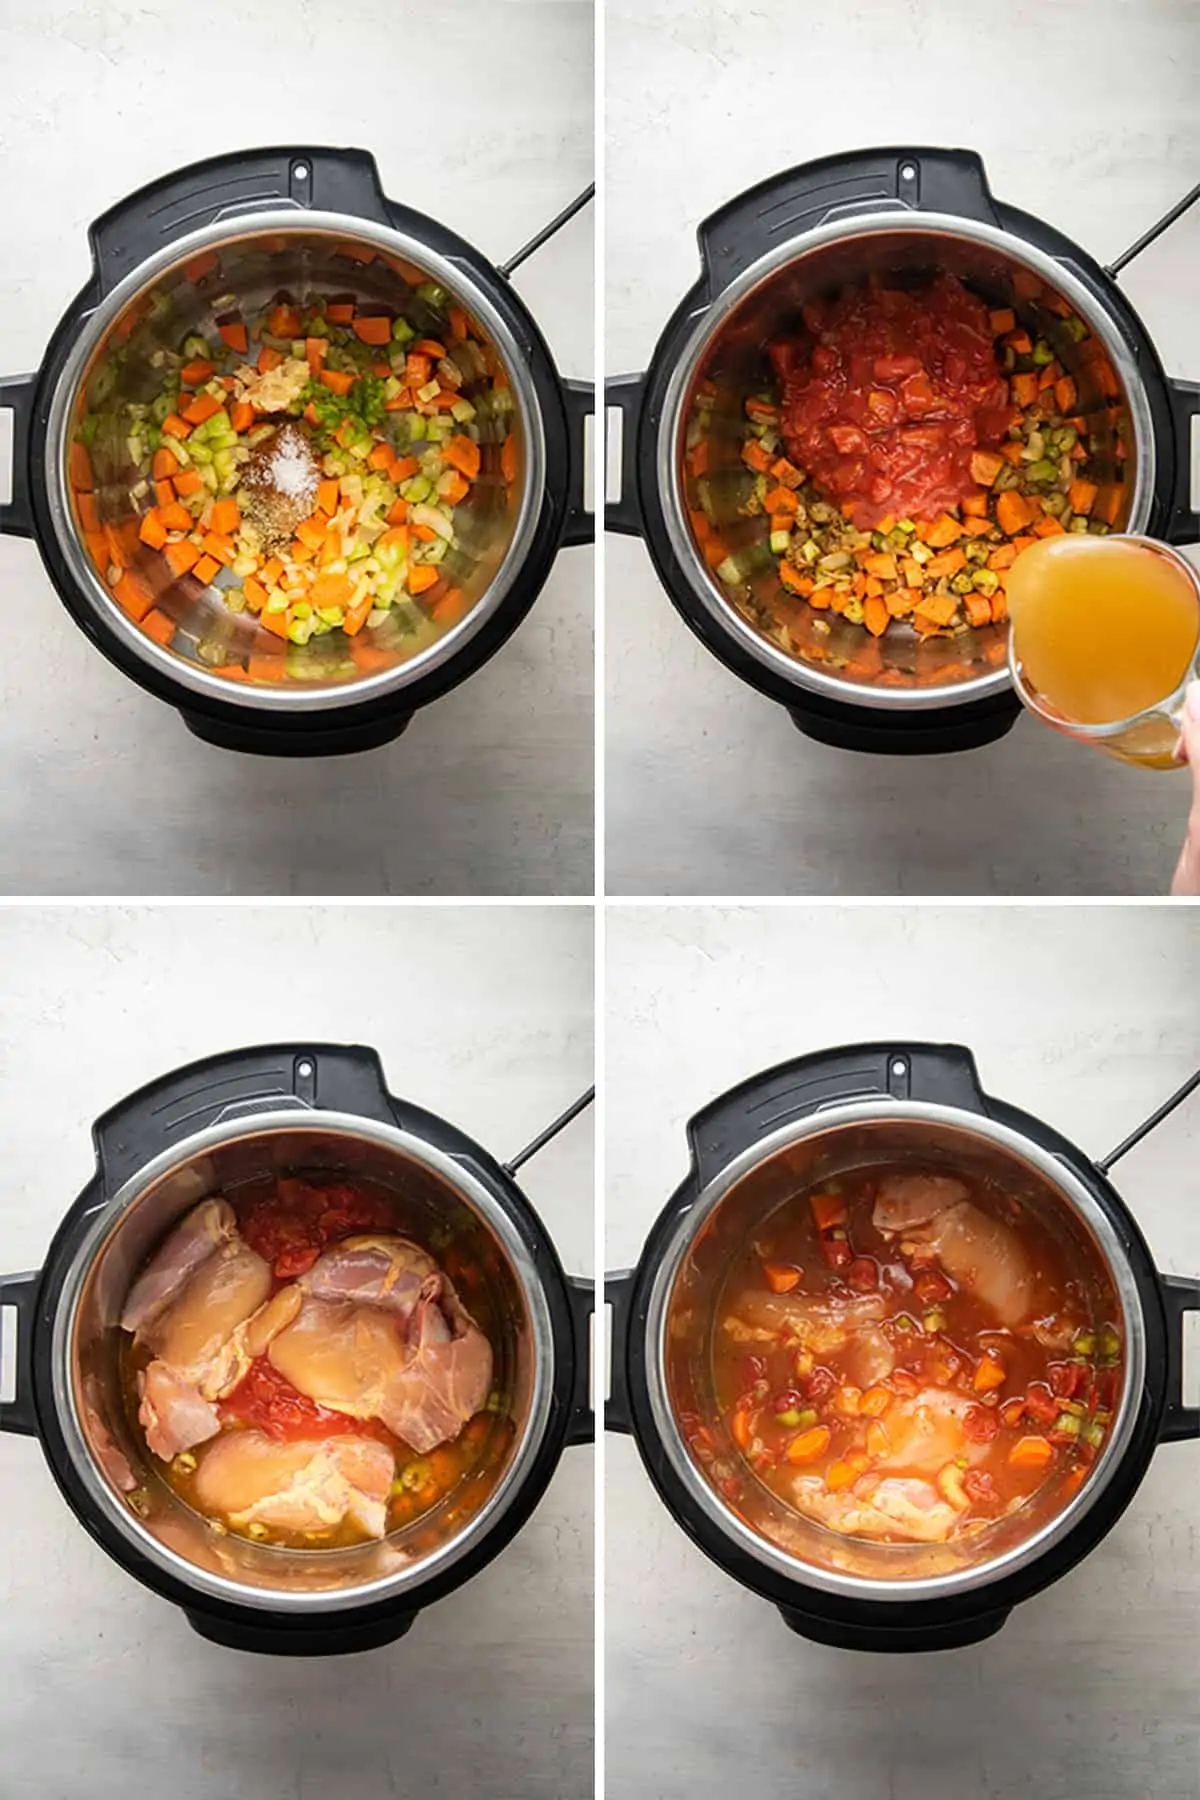 Four pictures: carrots, celery, and onion cooking in an Instant Pot; veggies with canned tomatoes on top in an Instant Pot; veggies with canned tomatoes and chicken thighs on top of them in an Instant Pot; and chicken and tomatoes stirred into an Instant Pot with veggies